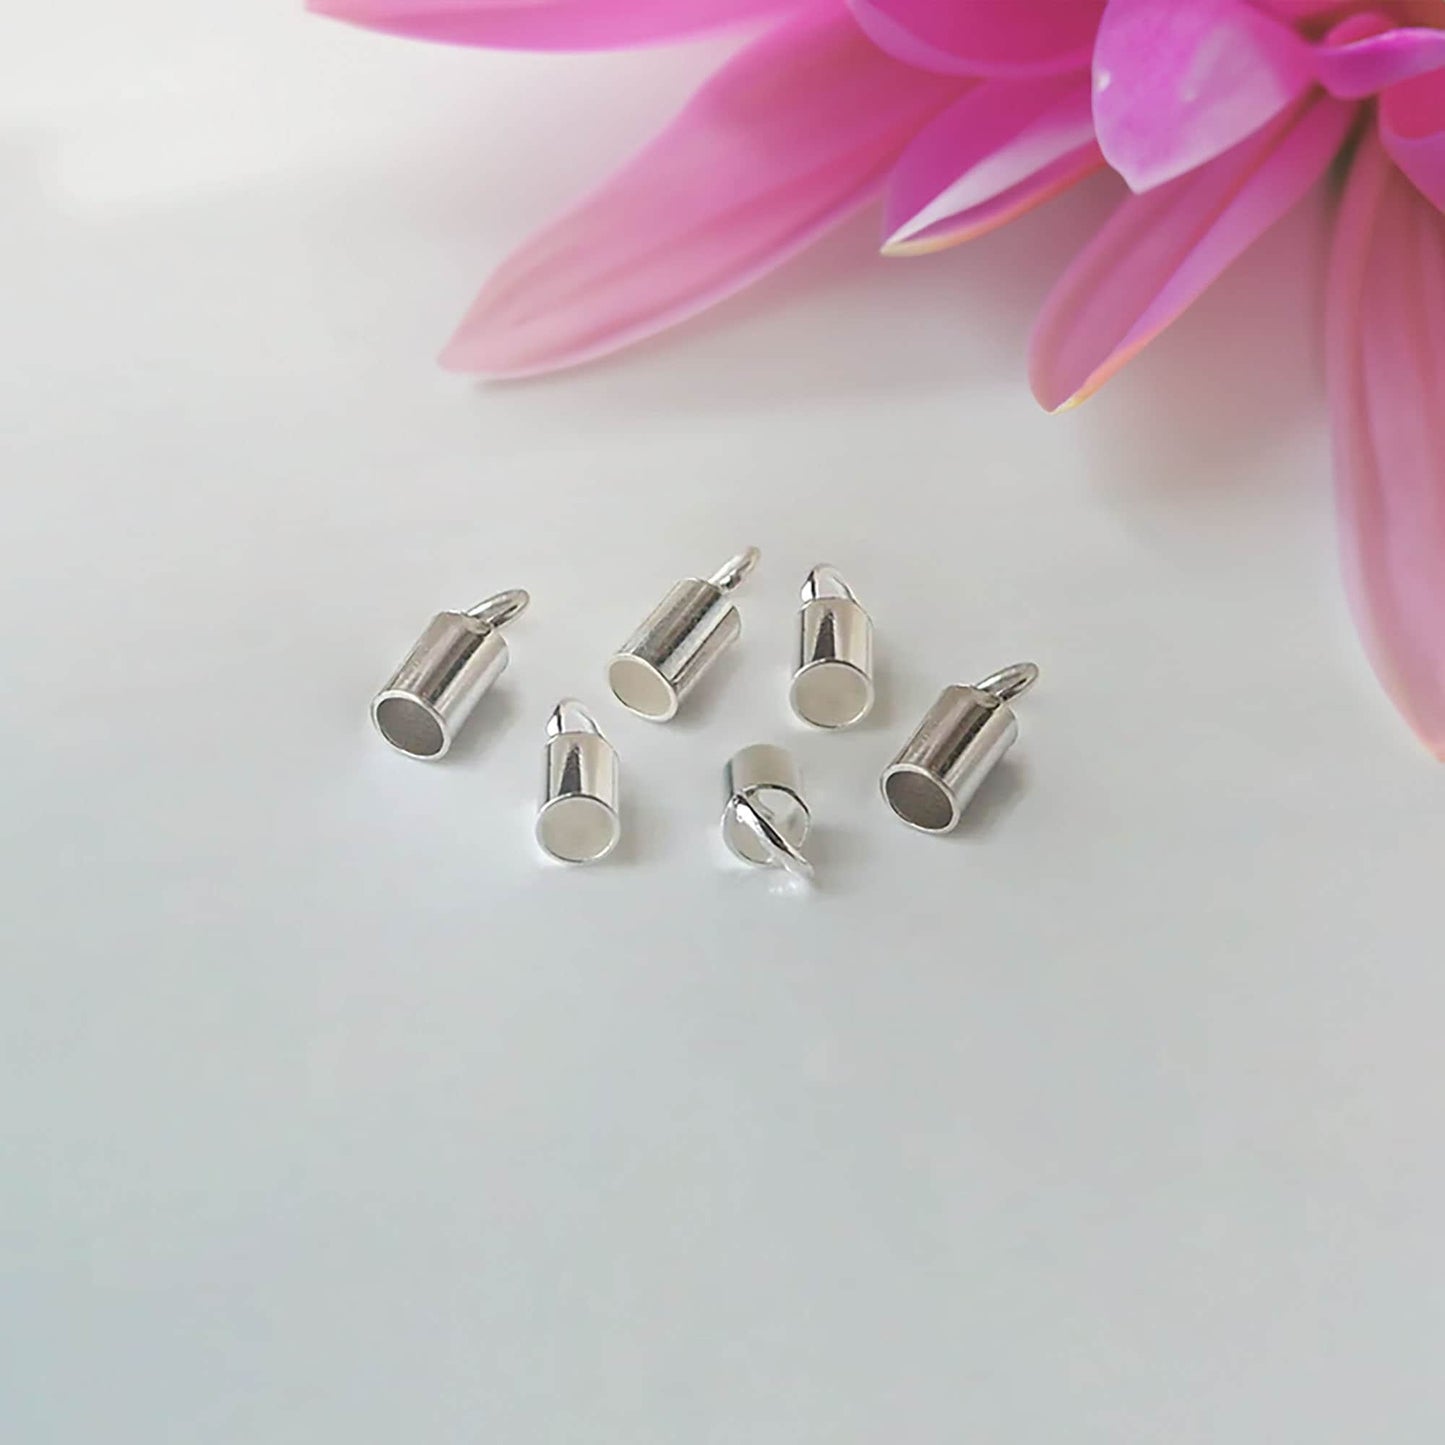 Crimp tube bead with loop, 925 sterling silver crimp ends, size from 1mm to 4mm